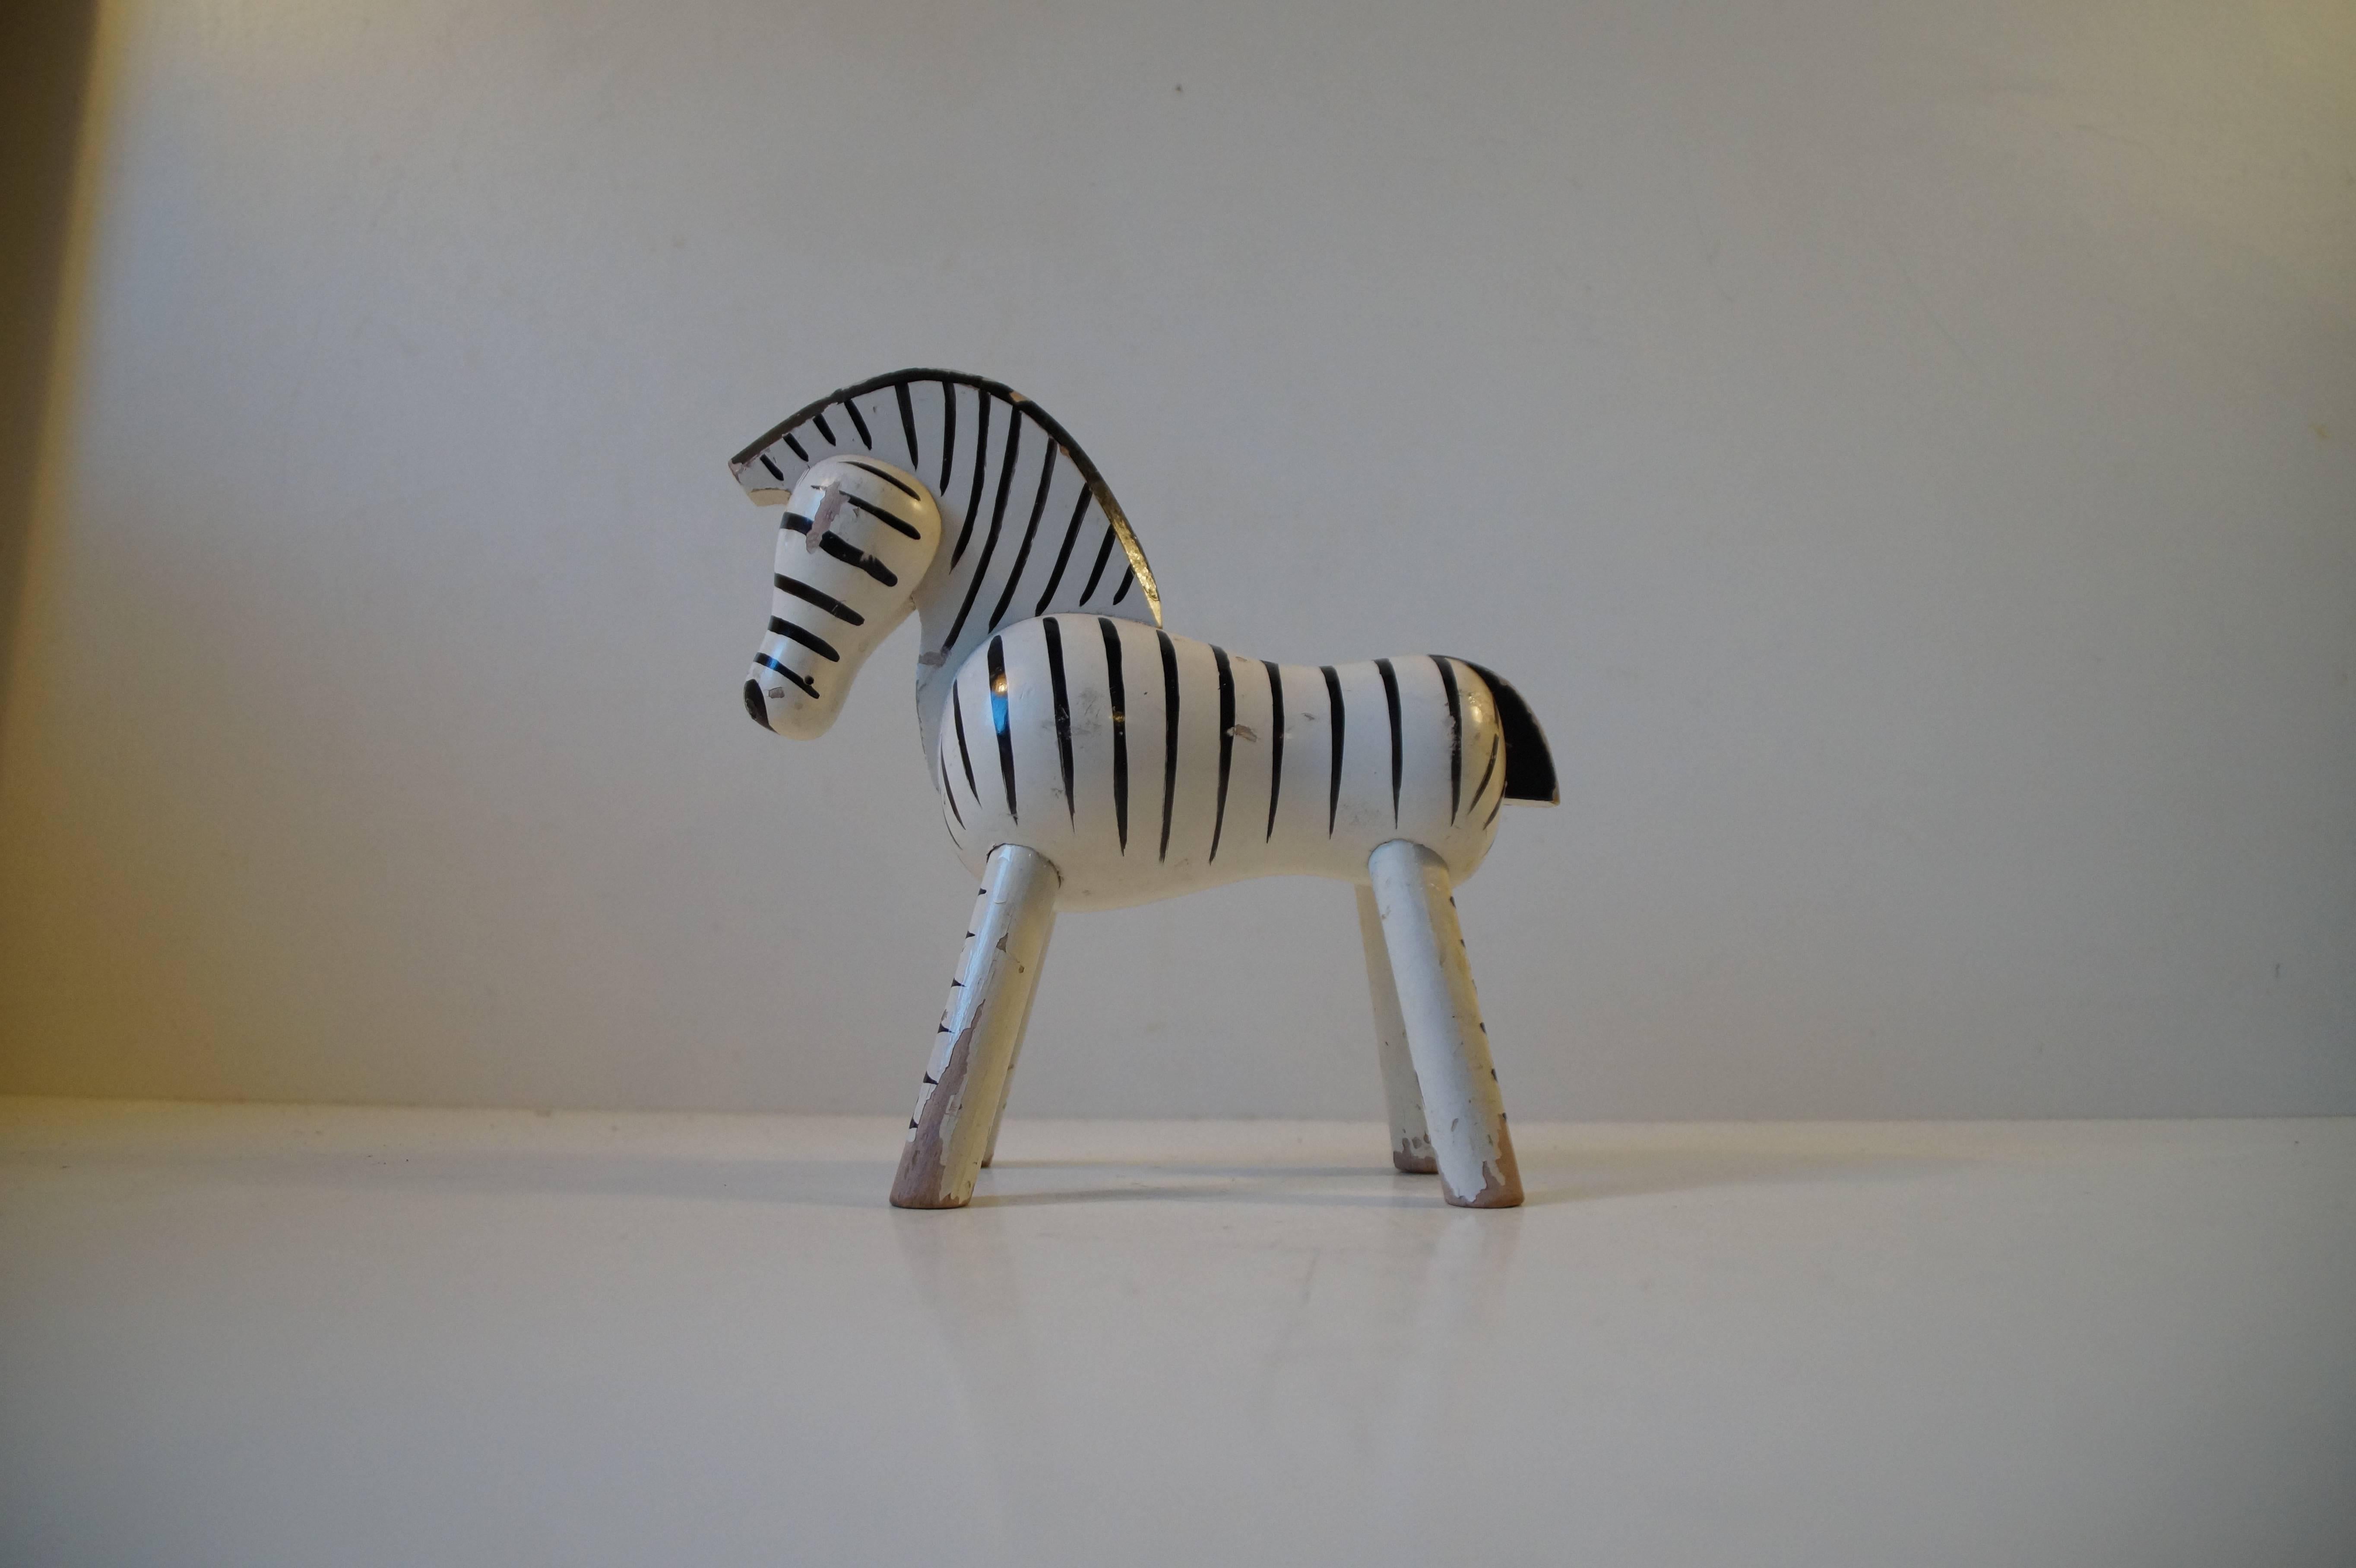 Type: Wooden toy zebra, Figurine. Material: Beech. Color: White and black.
Design: Kay Bojesen. Origin: Denmark. Period: Manufactured in the 1950s (Designed in 1935). Measurements: Height: Approximately 14 cm (5.6 inch). Length: Approximately 15 cm